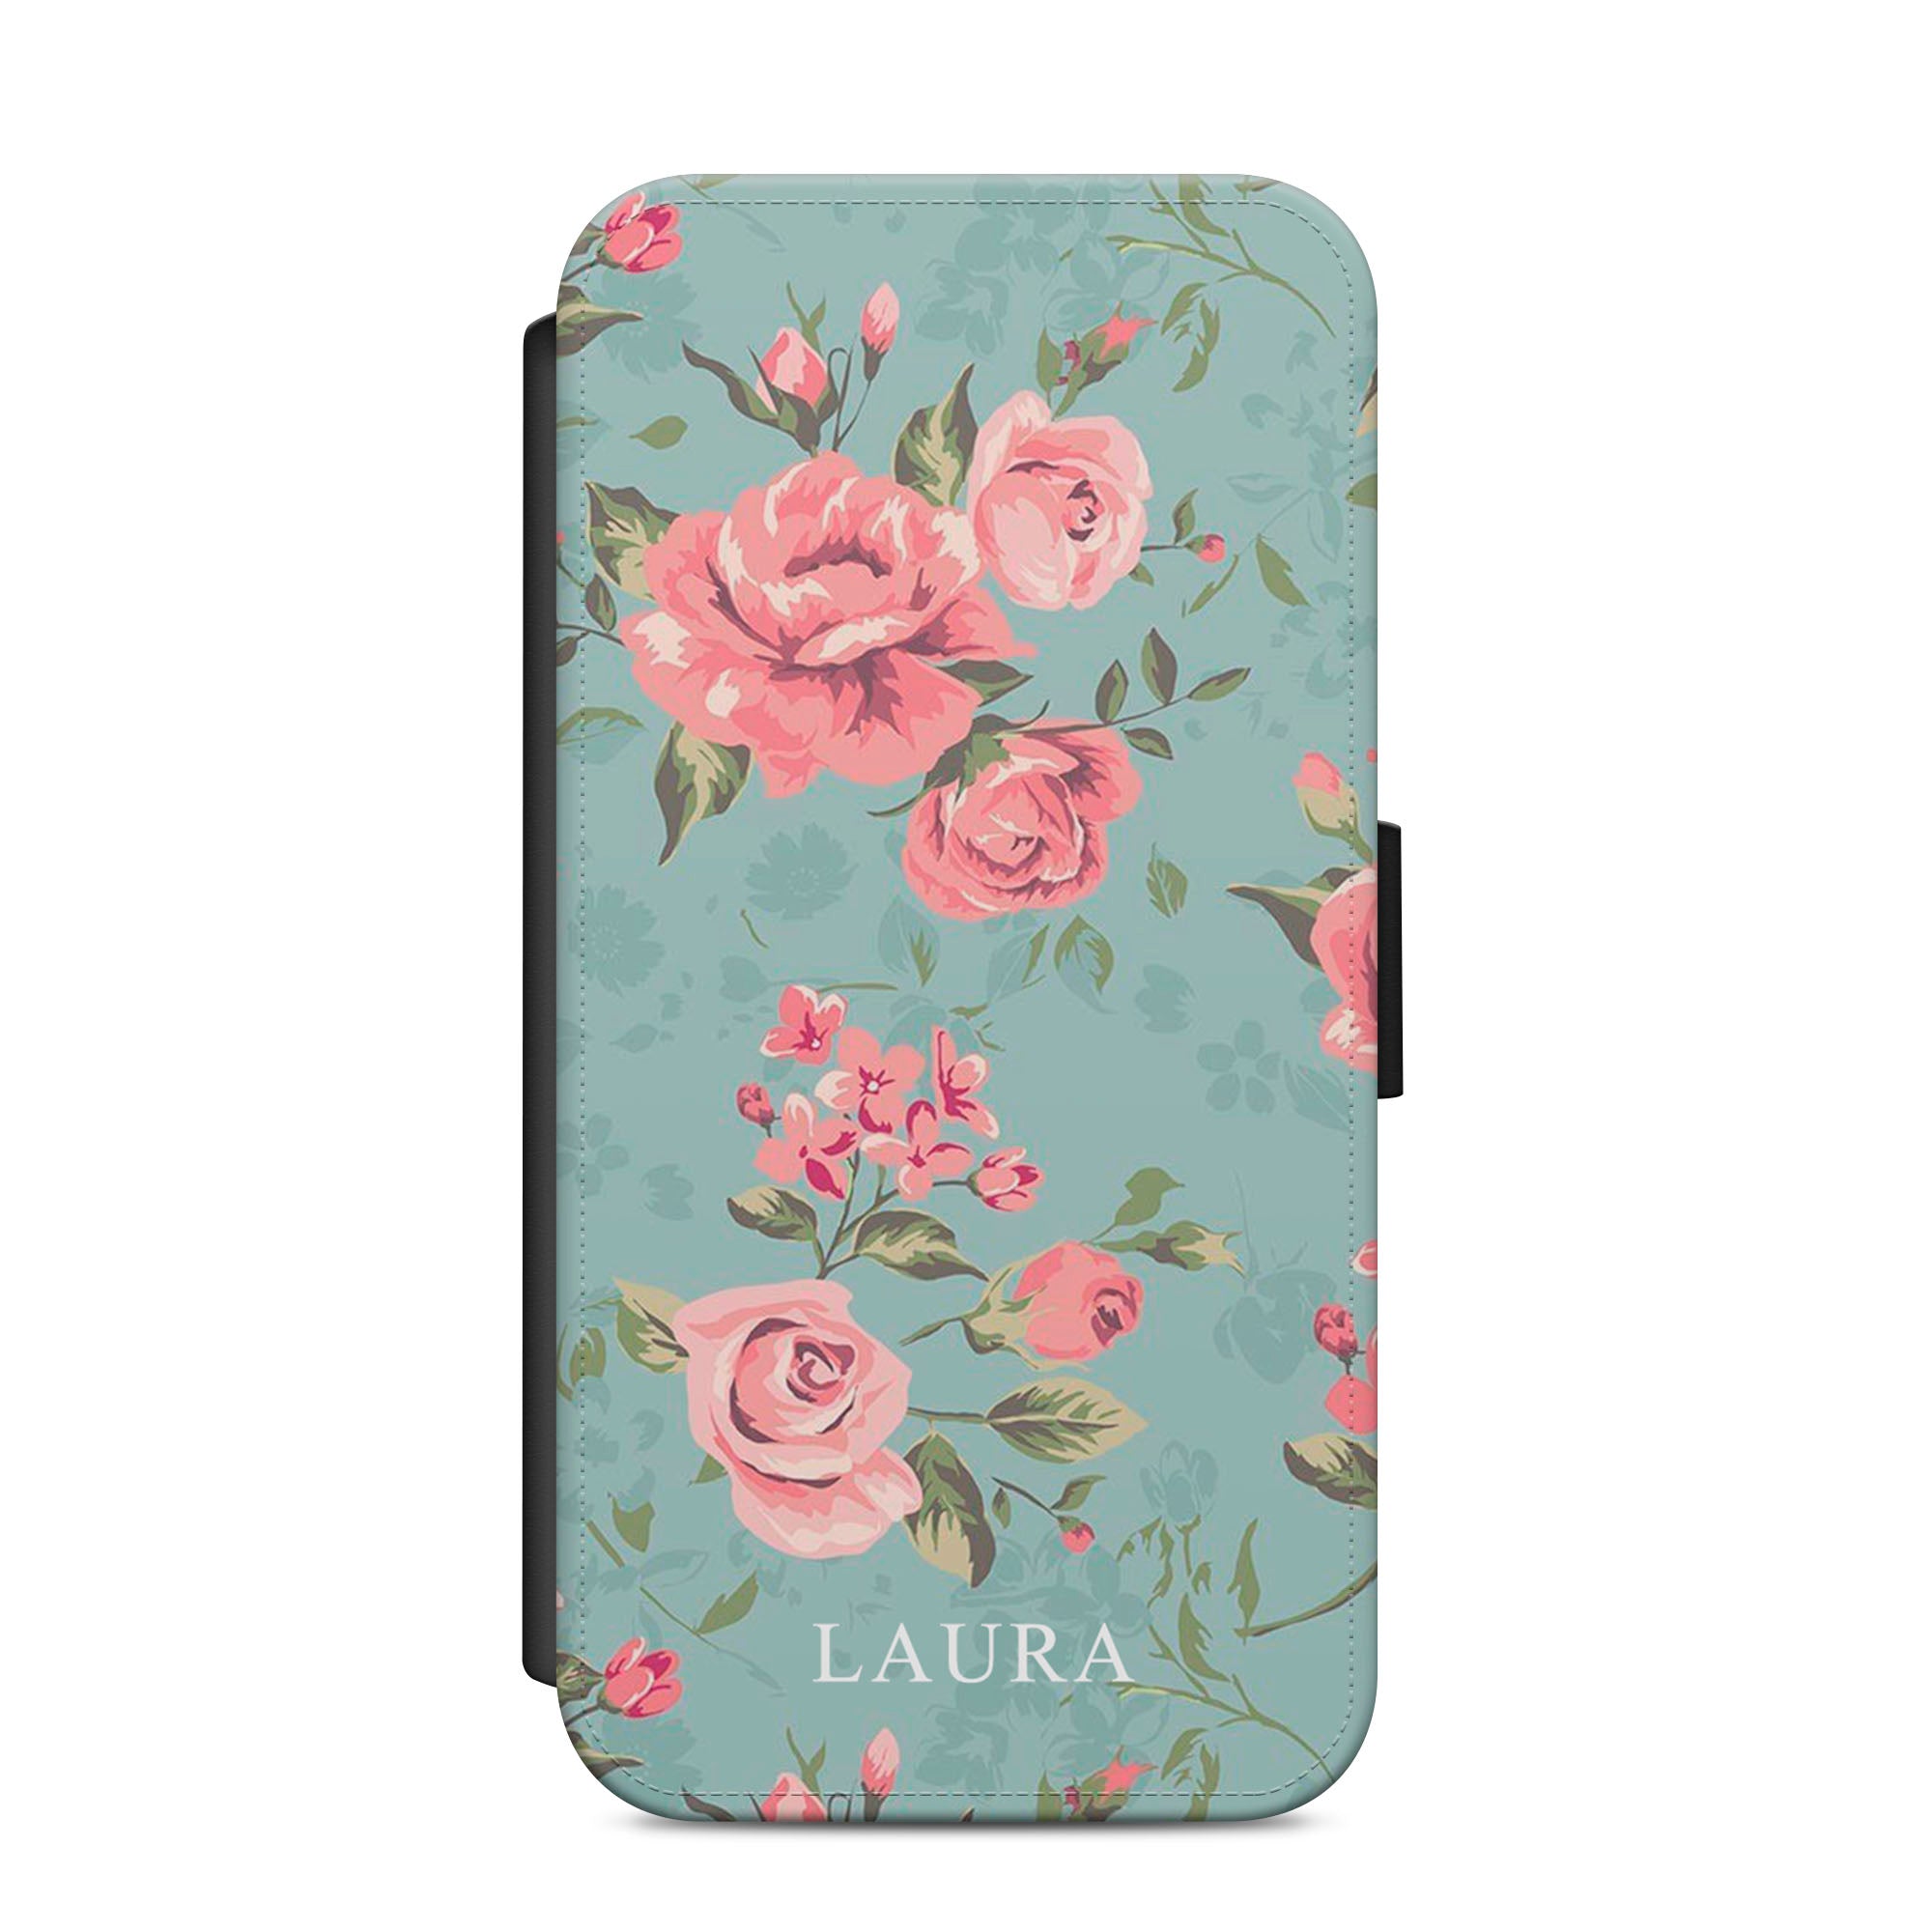 Personalised Floral Faux Leather Flip Case Wallet for iPhone / Samsung